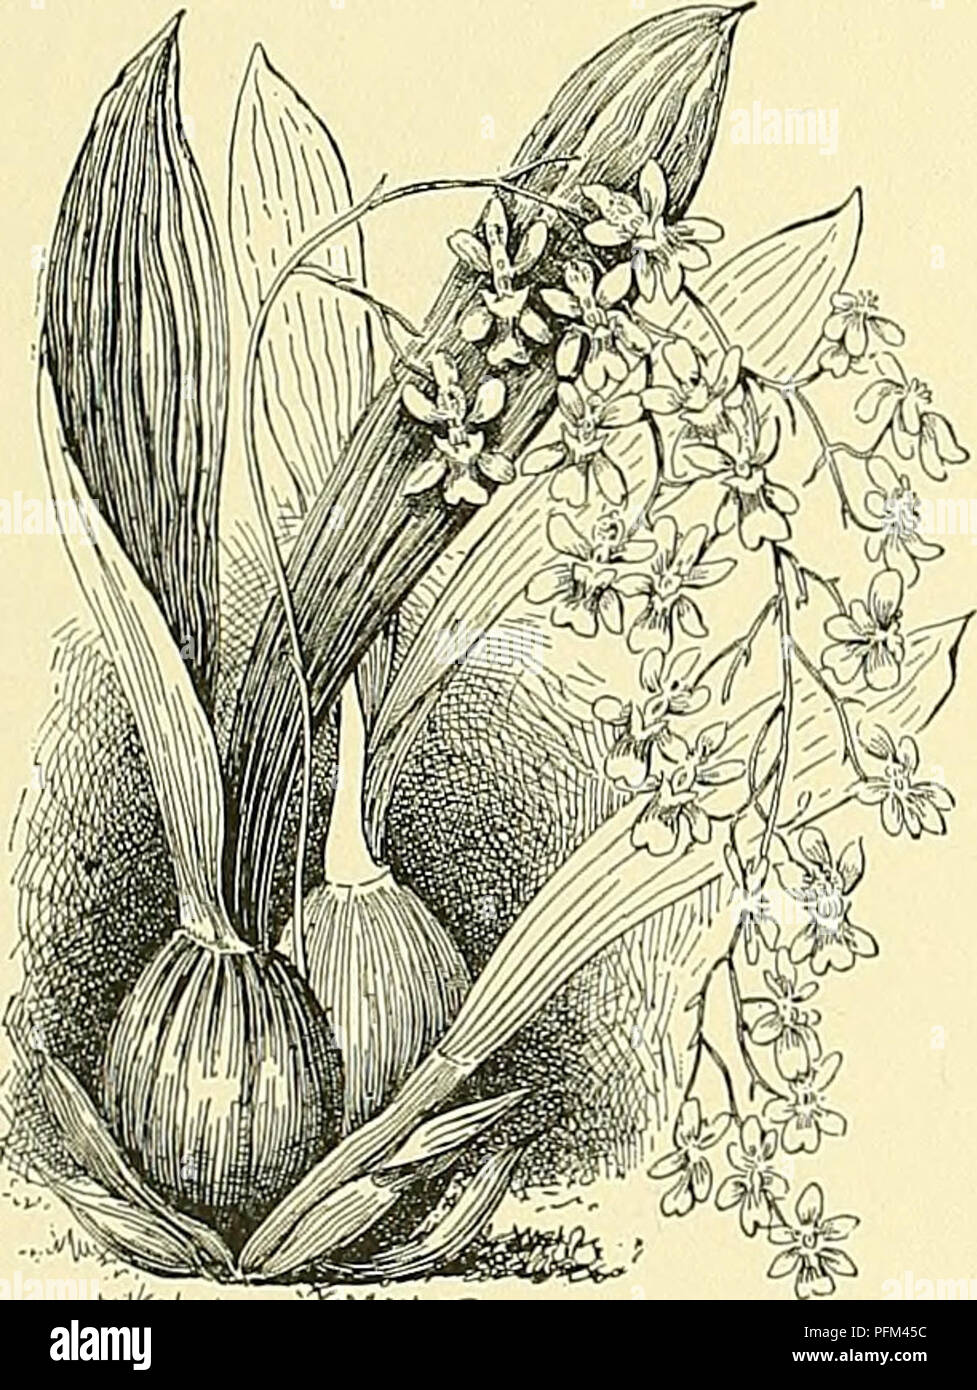 . Cyclopedia of American horticulture, comprising suggestions for cultivation of horticultural plants, descriptions of the species of fruits, vegetables, flowers, and ornamental plants sold in the United States and Canada, together with geographical and biographical sketches. Gardening. ONCIDIUM ONCIDIUM 1133 with, flower-stems G-9 ft. long and &quot;Ivs. as long.&quot; It has been confused with O. altlssimum. 25. altissimum, Swartz. Pseudobulbs nearly rotund, much compressed and edged: Irs. 1-2 at the top and several at the base of the pseudobulb, ensiform, keeled, lK-2 ft. long: inflorescenc Stock Photo